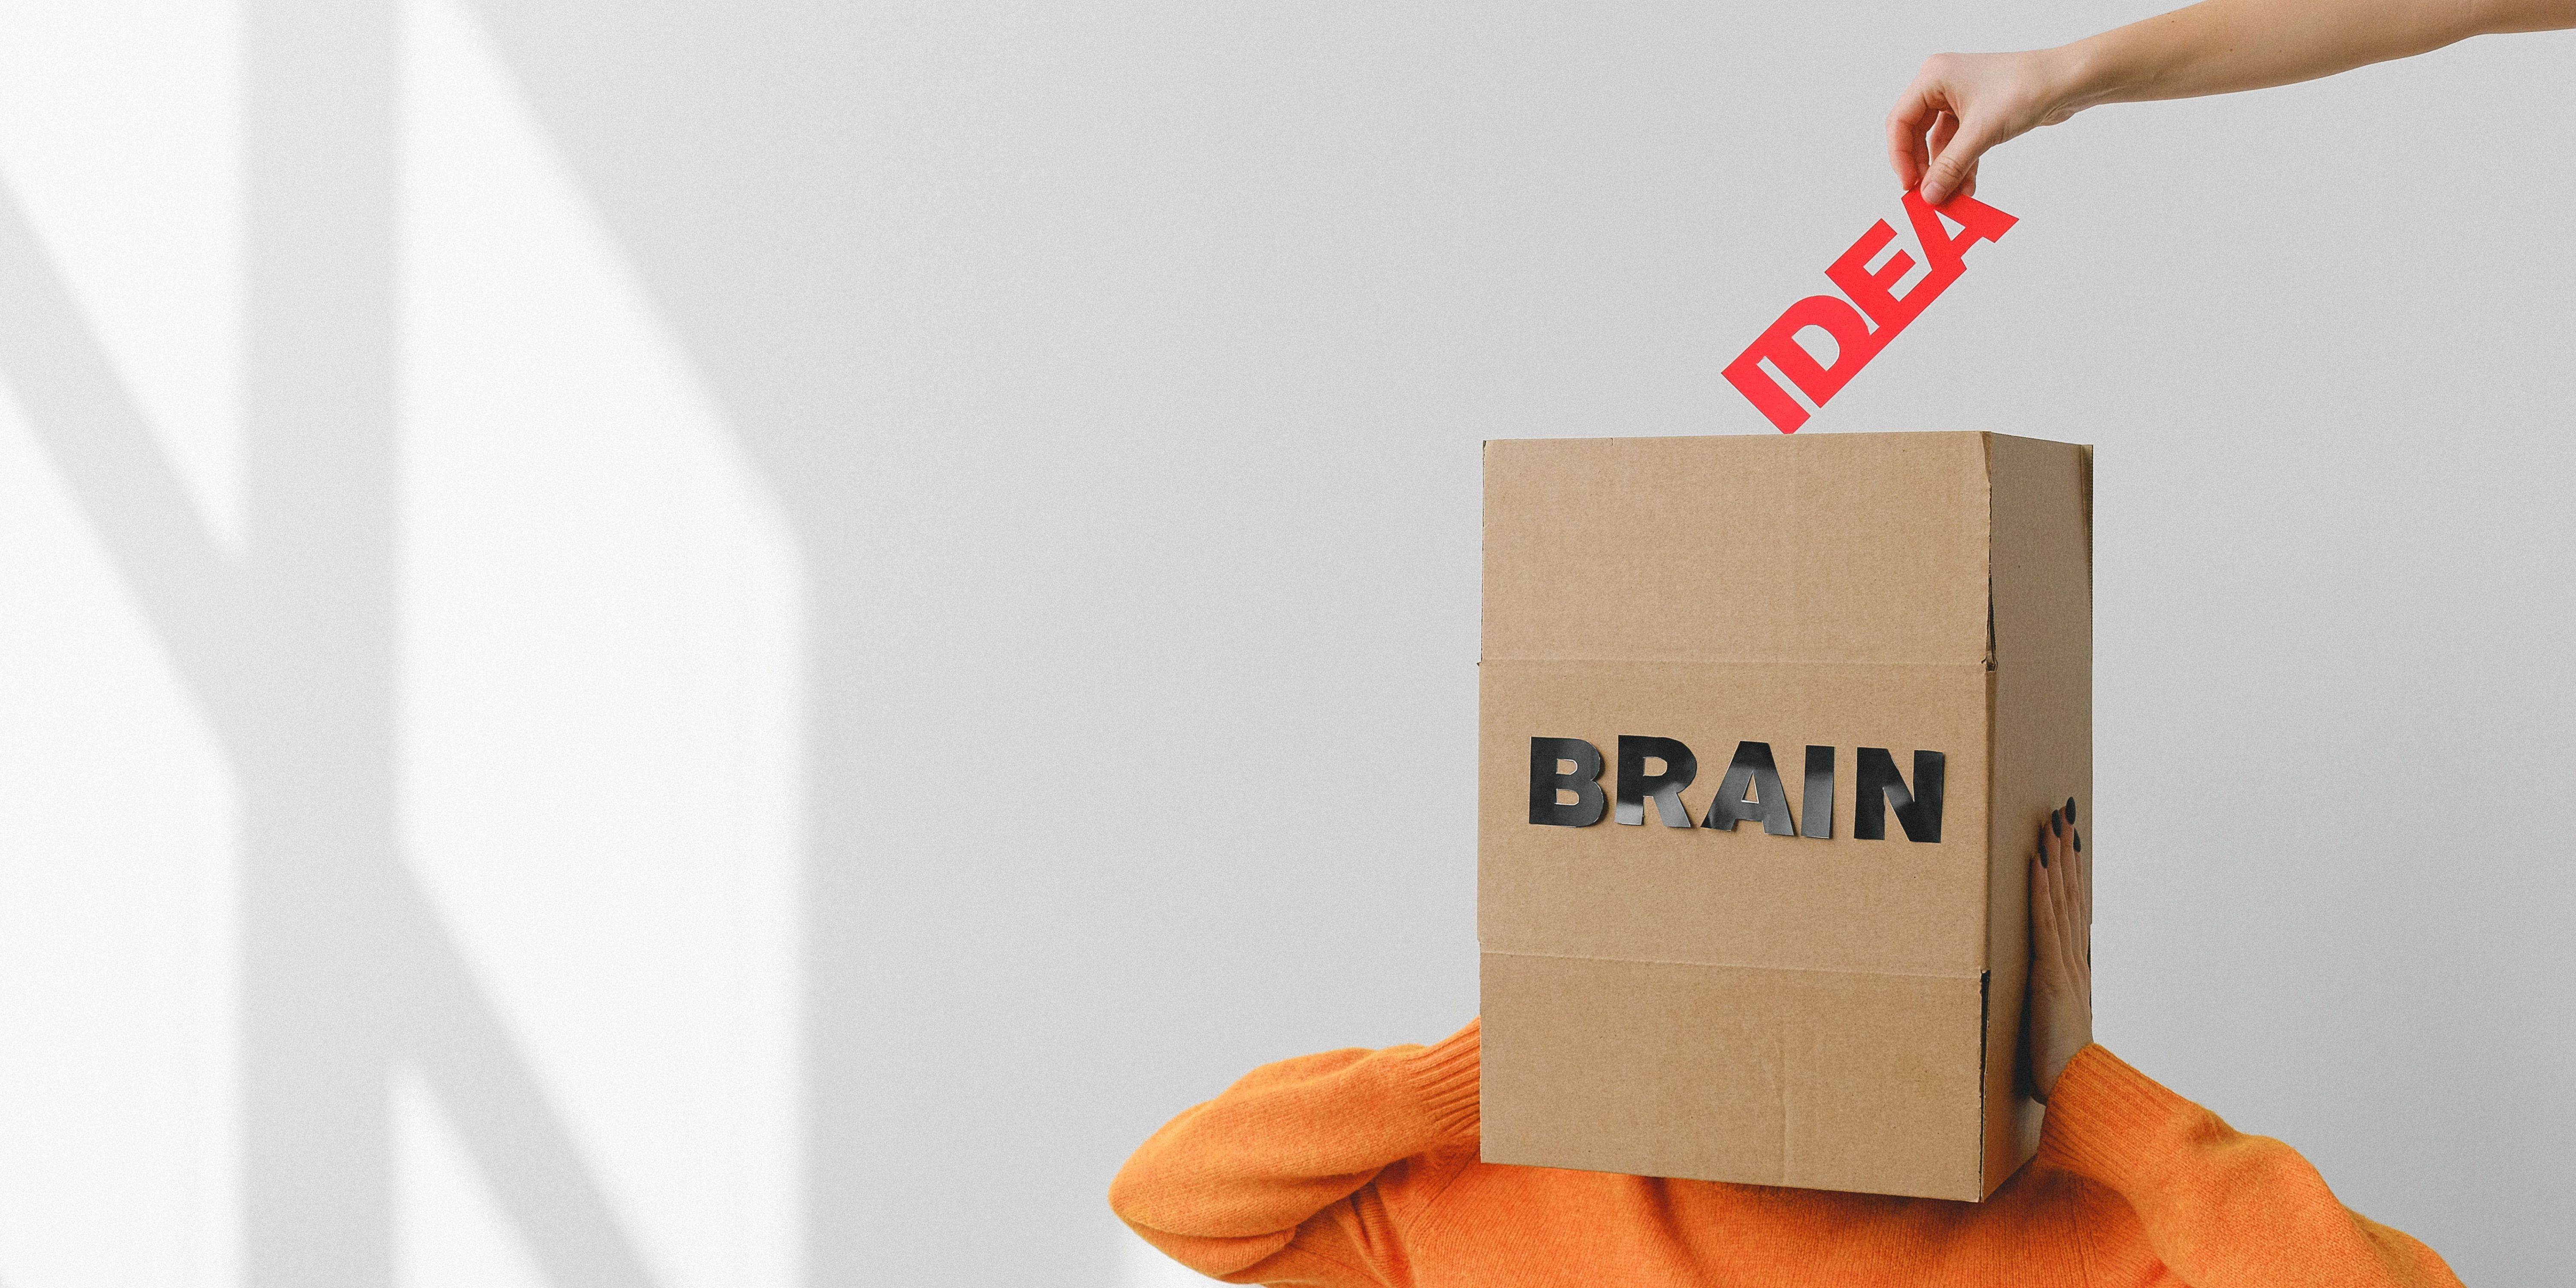 box labeled brain covering person's head while a hand drops the word 